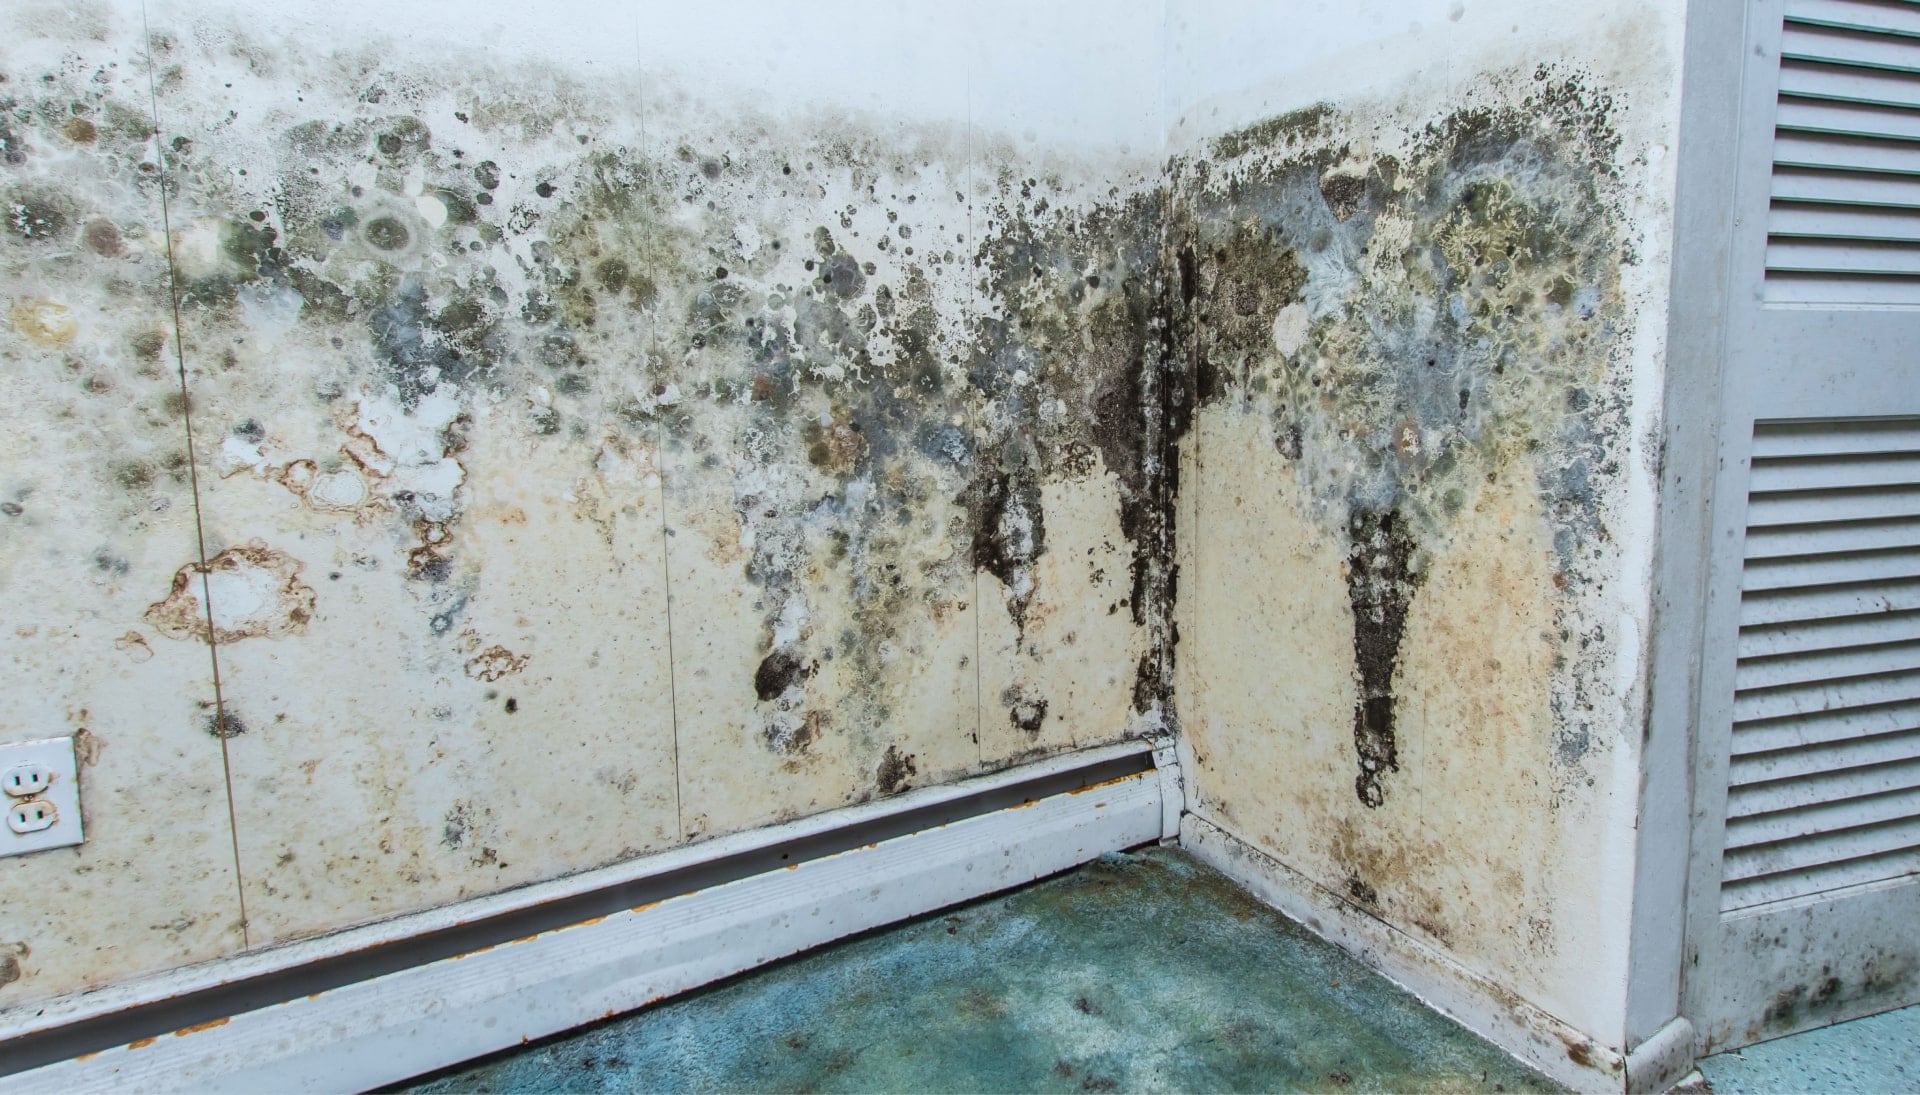 Professional mold removal, odor control, and water damage restoration service in Winter Park, Florida.